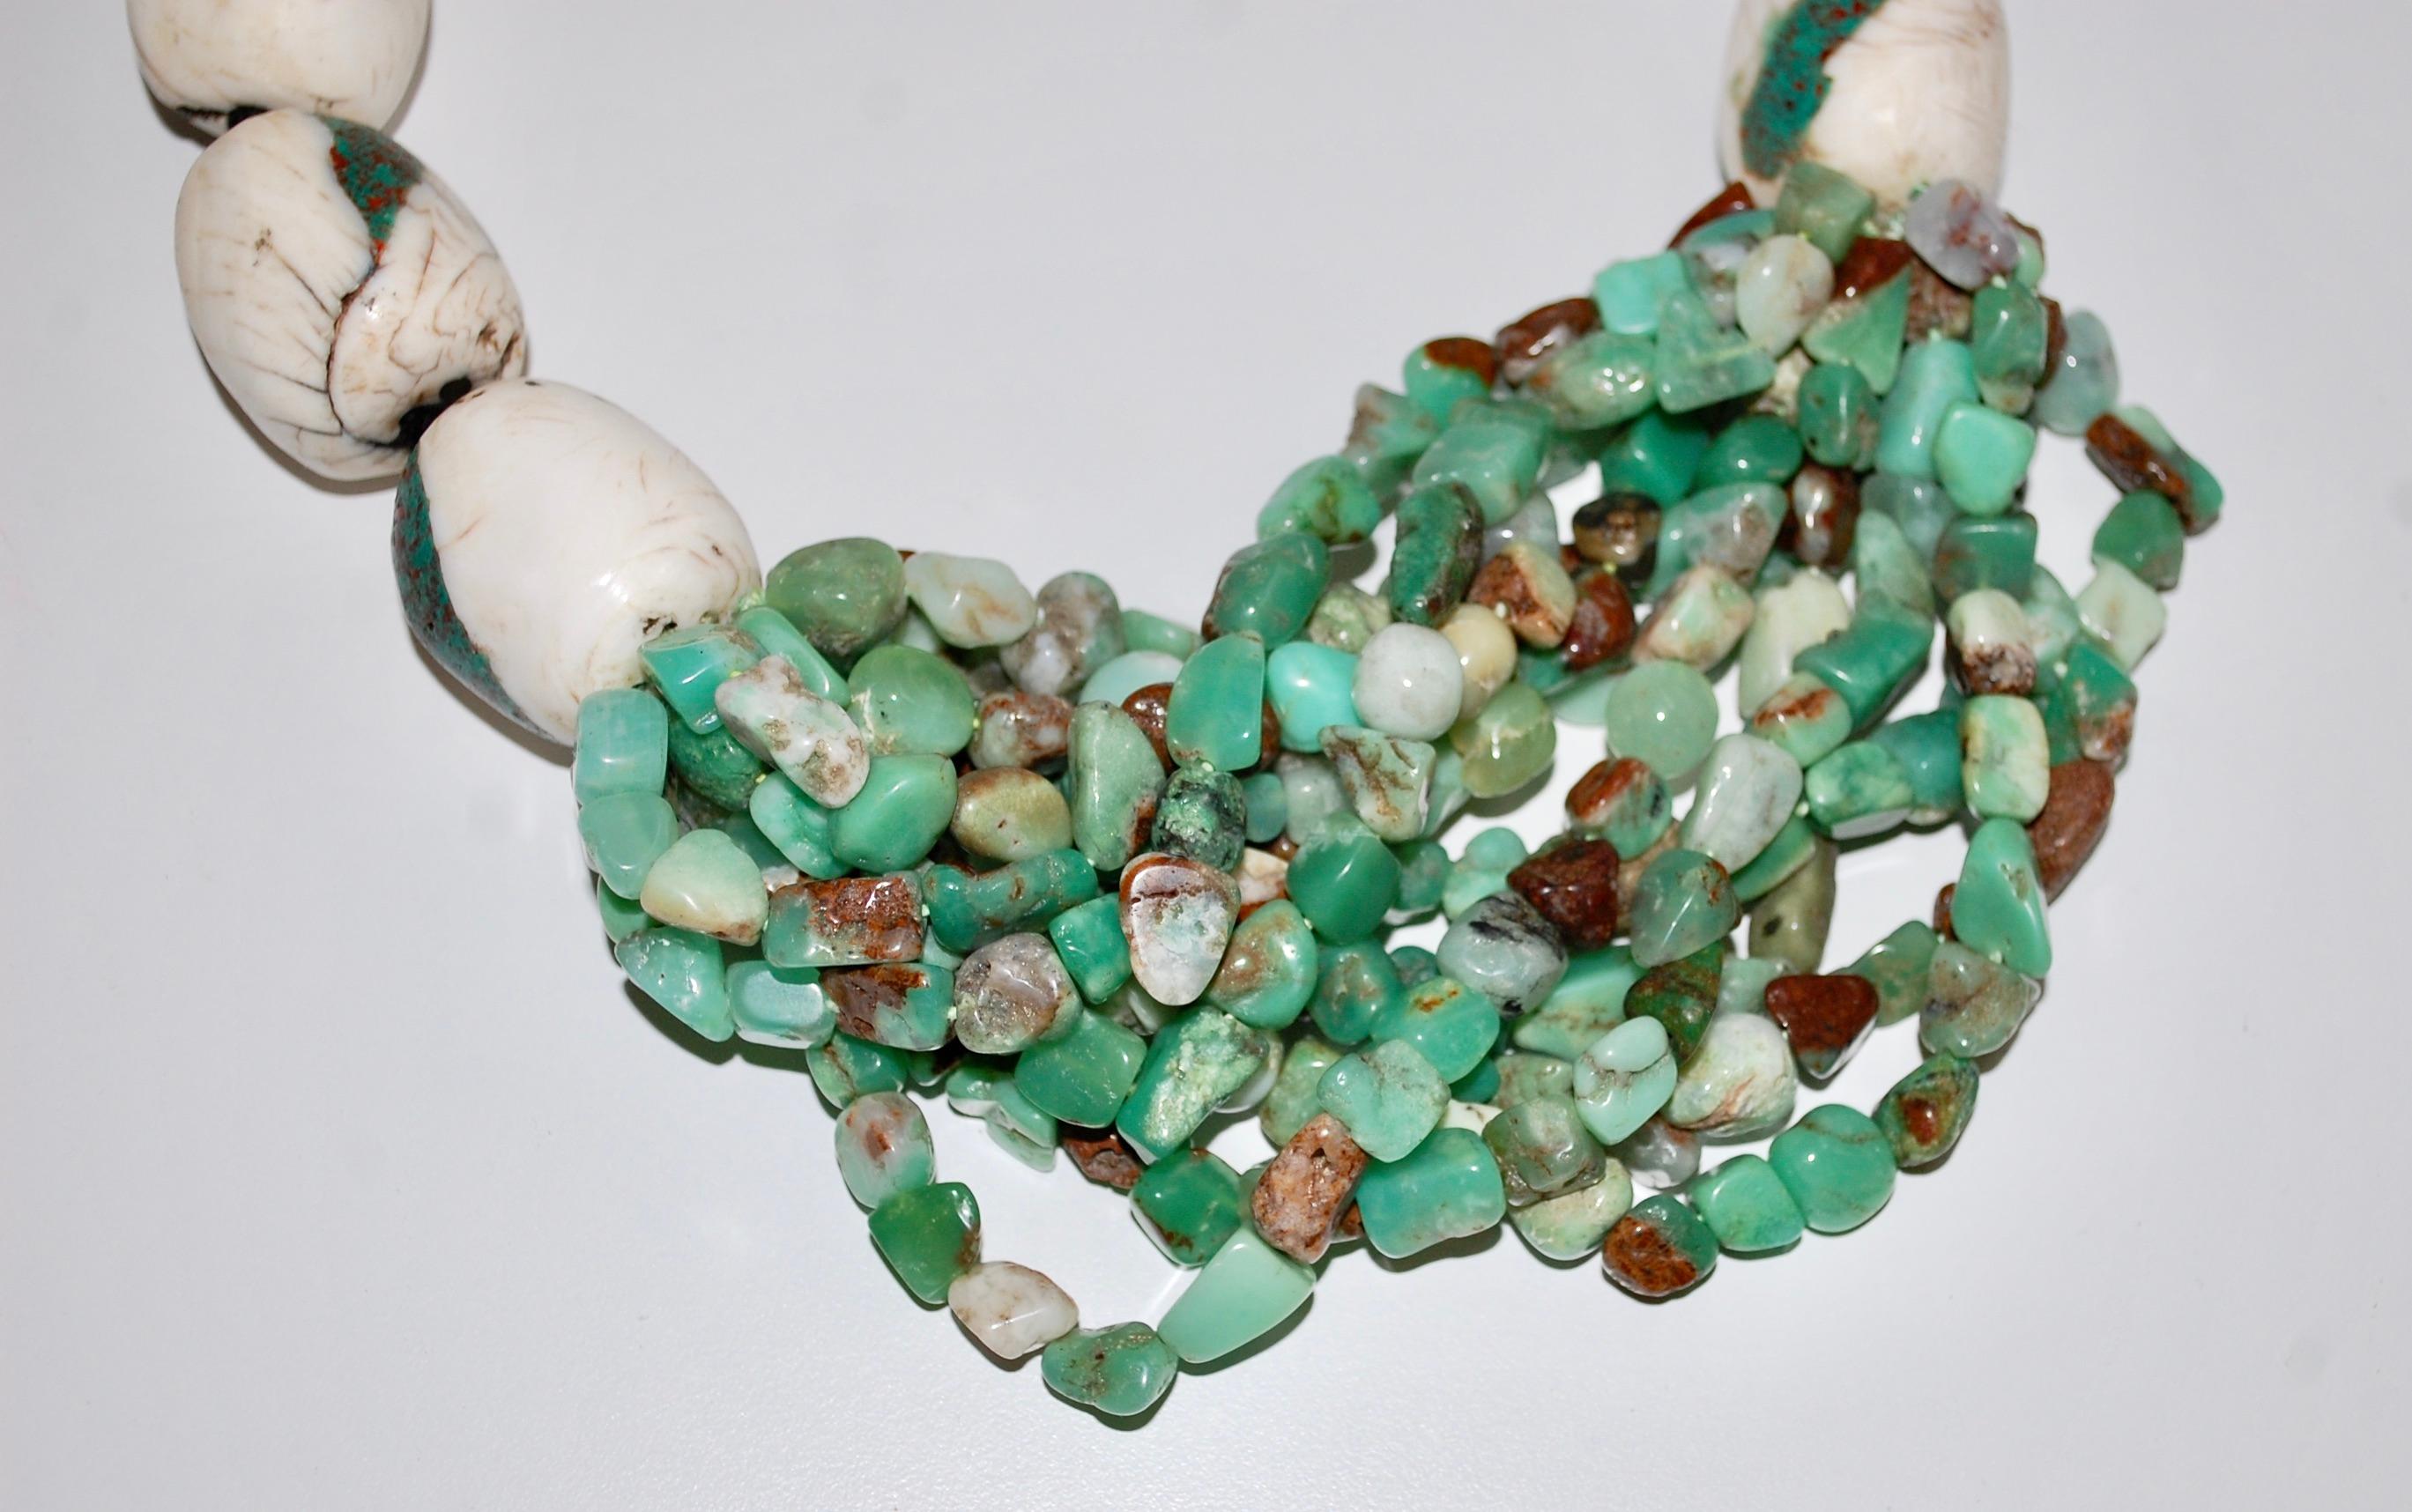  Monies Statement Necklace White Turquoise and Chrysoprase  In Excellent Condition For Sale In Lake Worth, FL